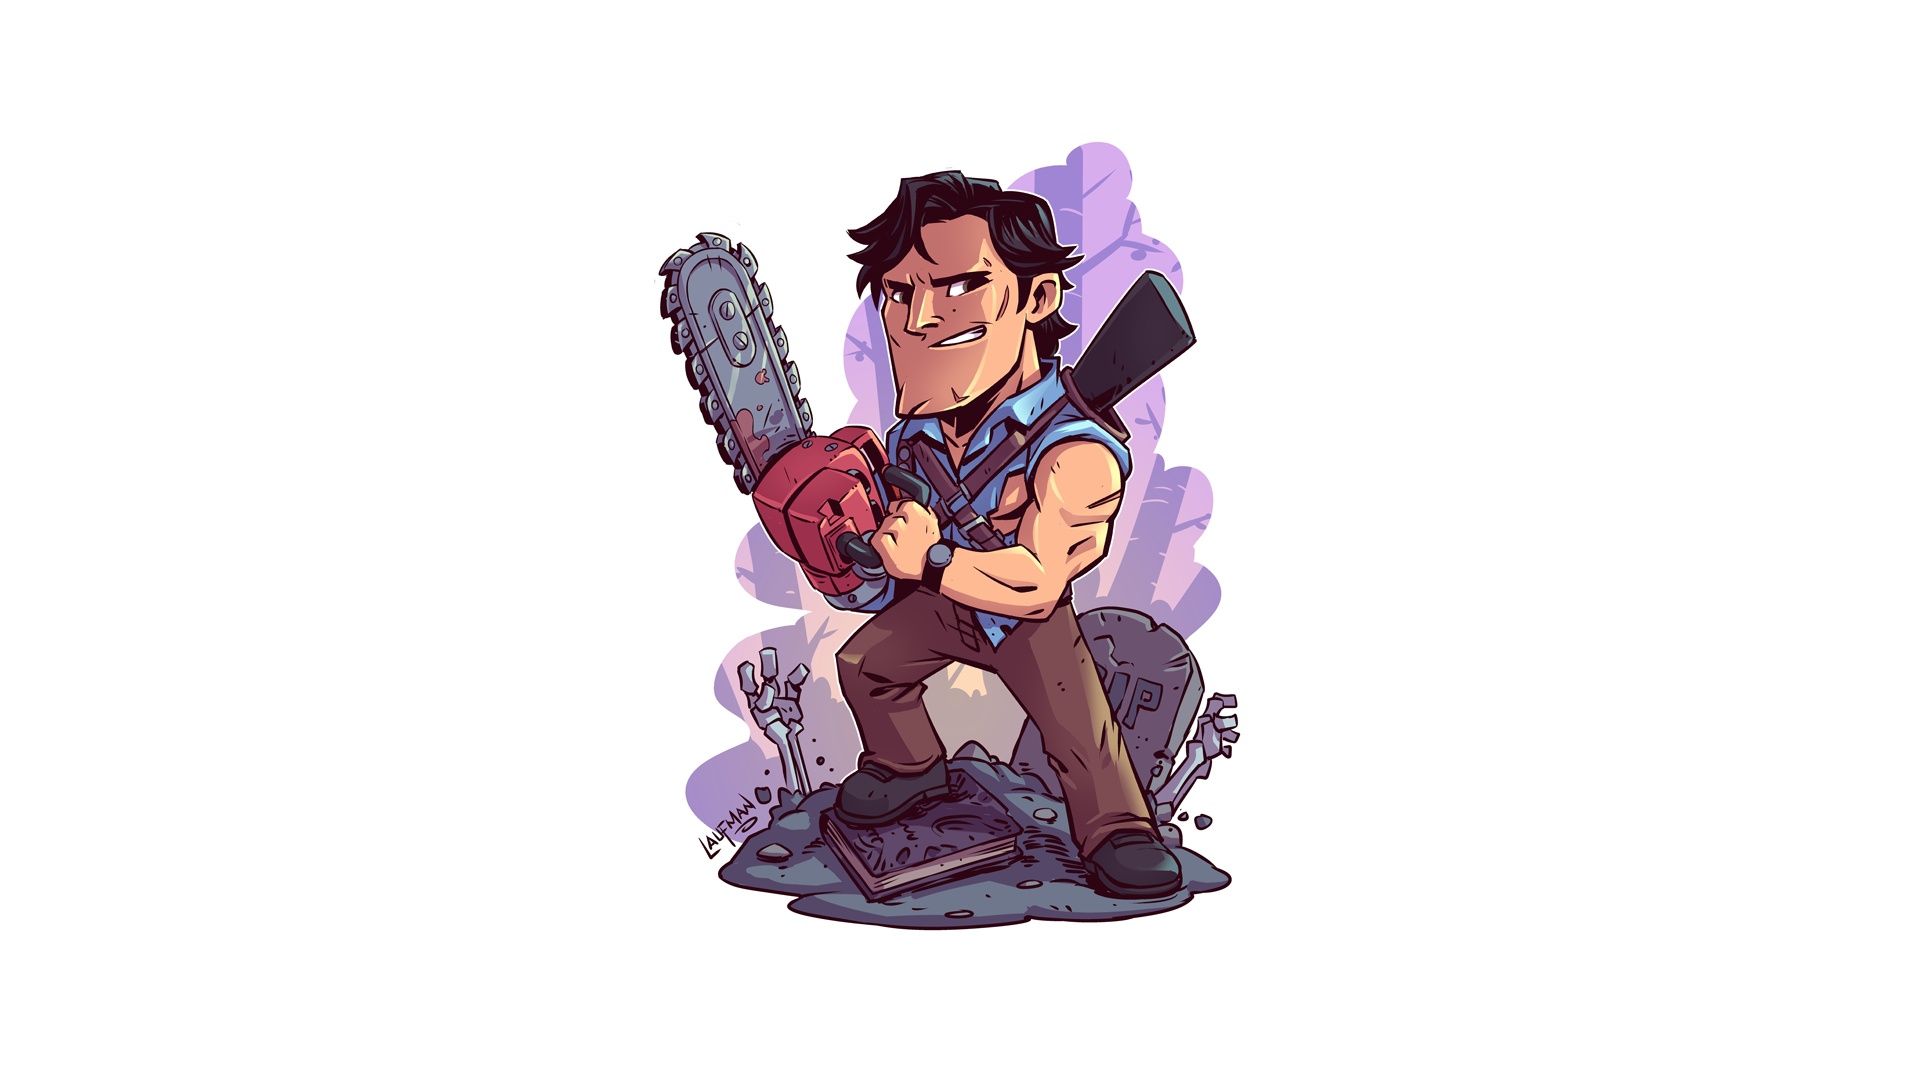 army of darkness ash wallpaper